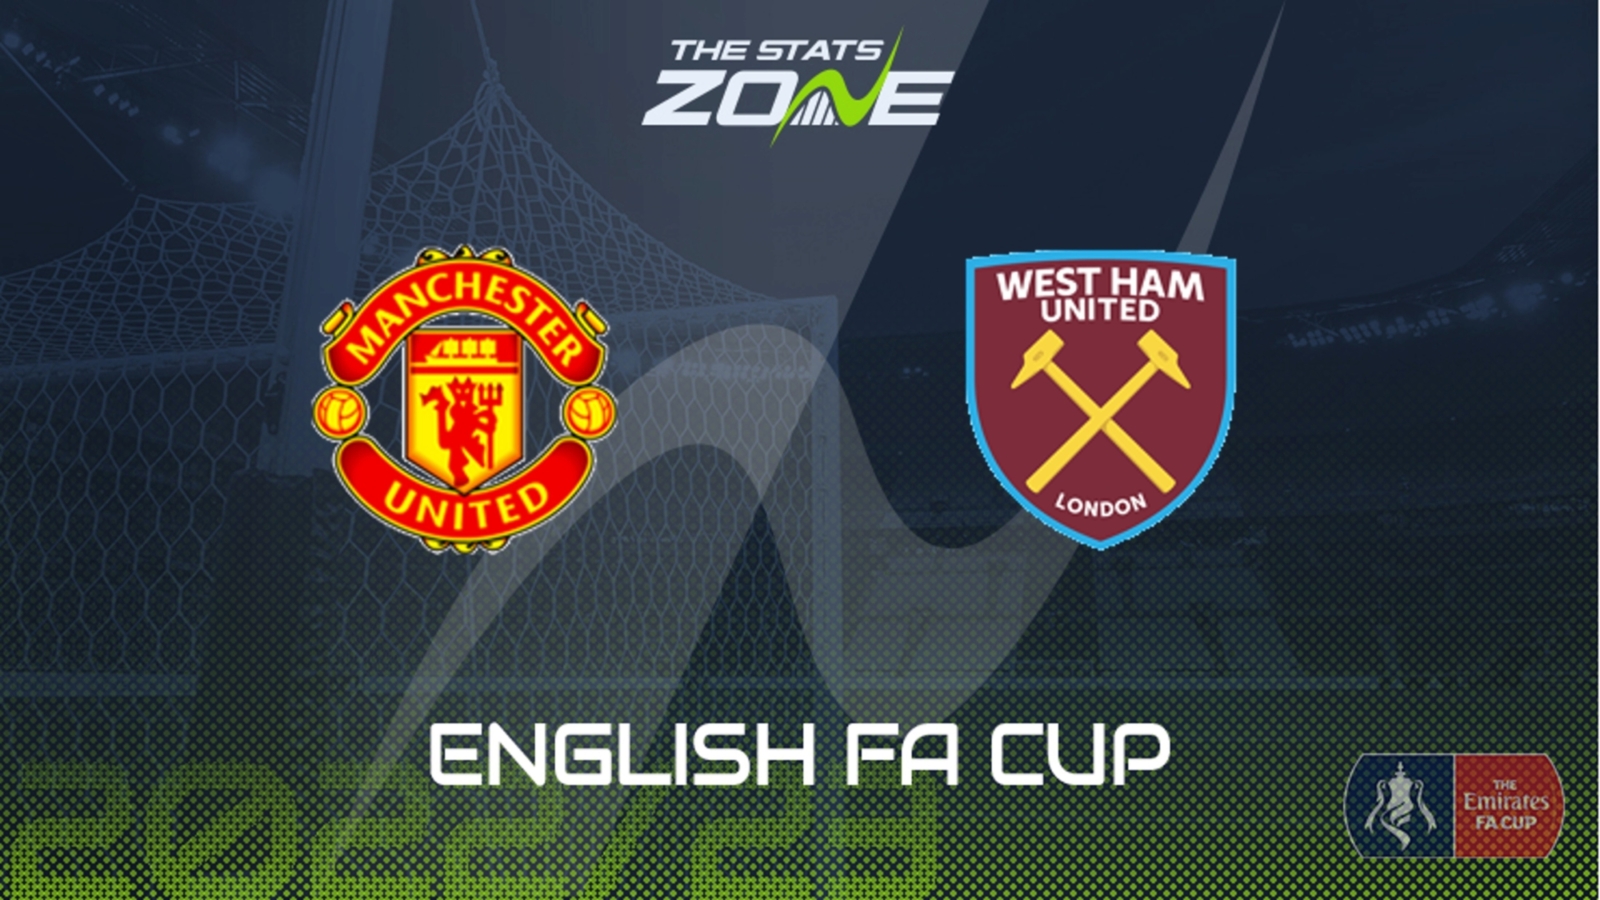 Man Utd Vs West Ham Fifth Round Preview And Prediction 2022 23 English Fa Cup The Stats Zone